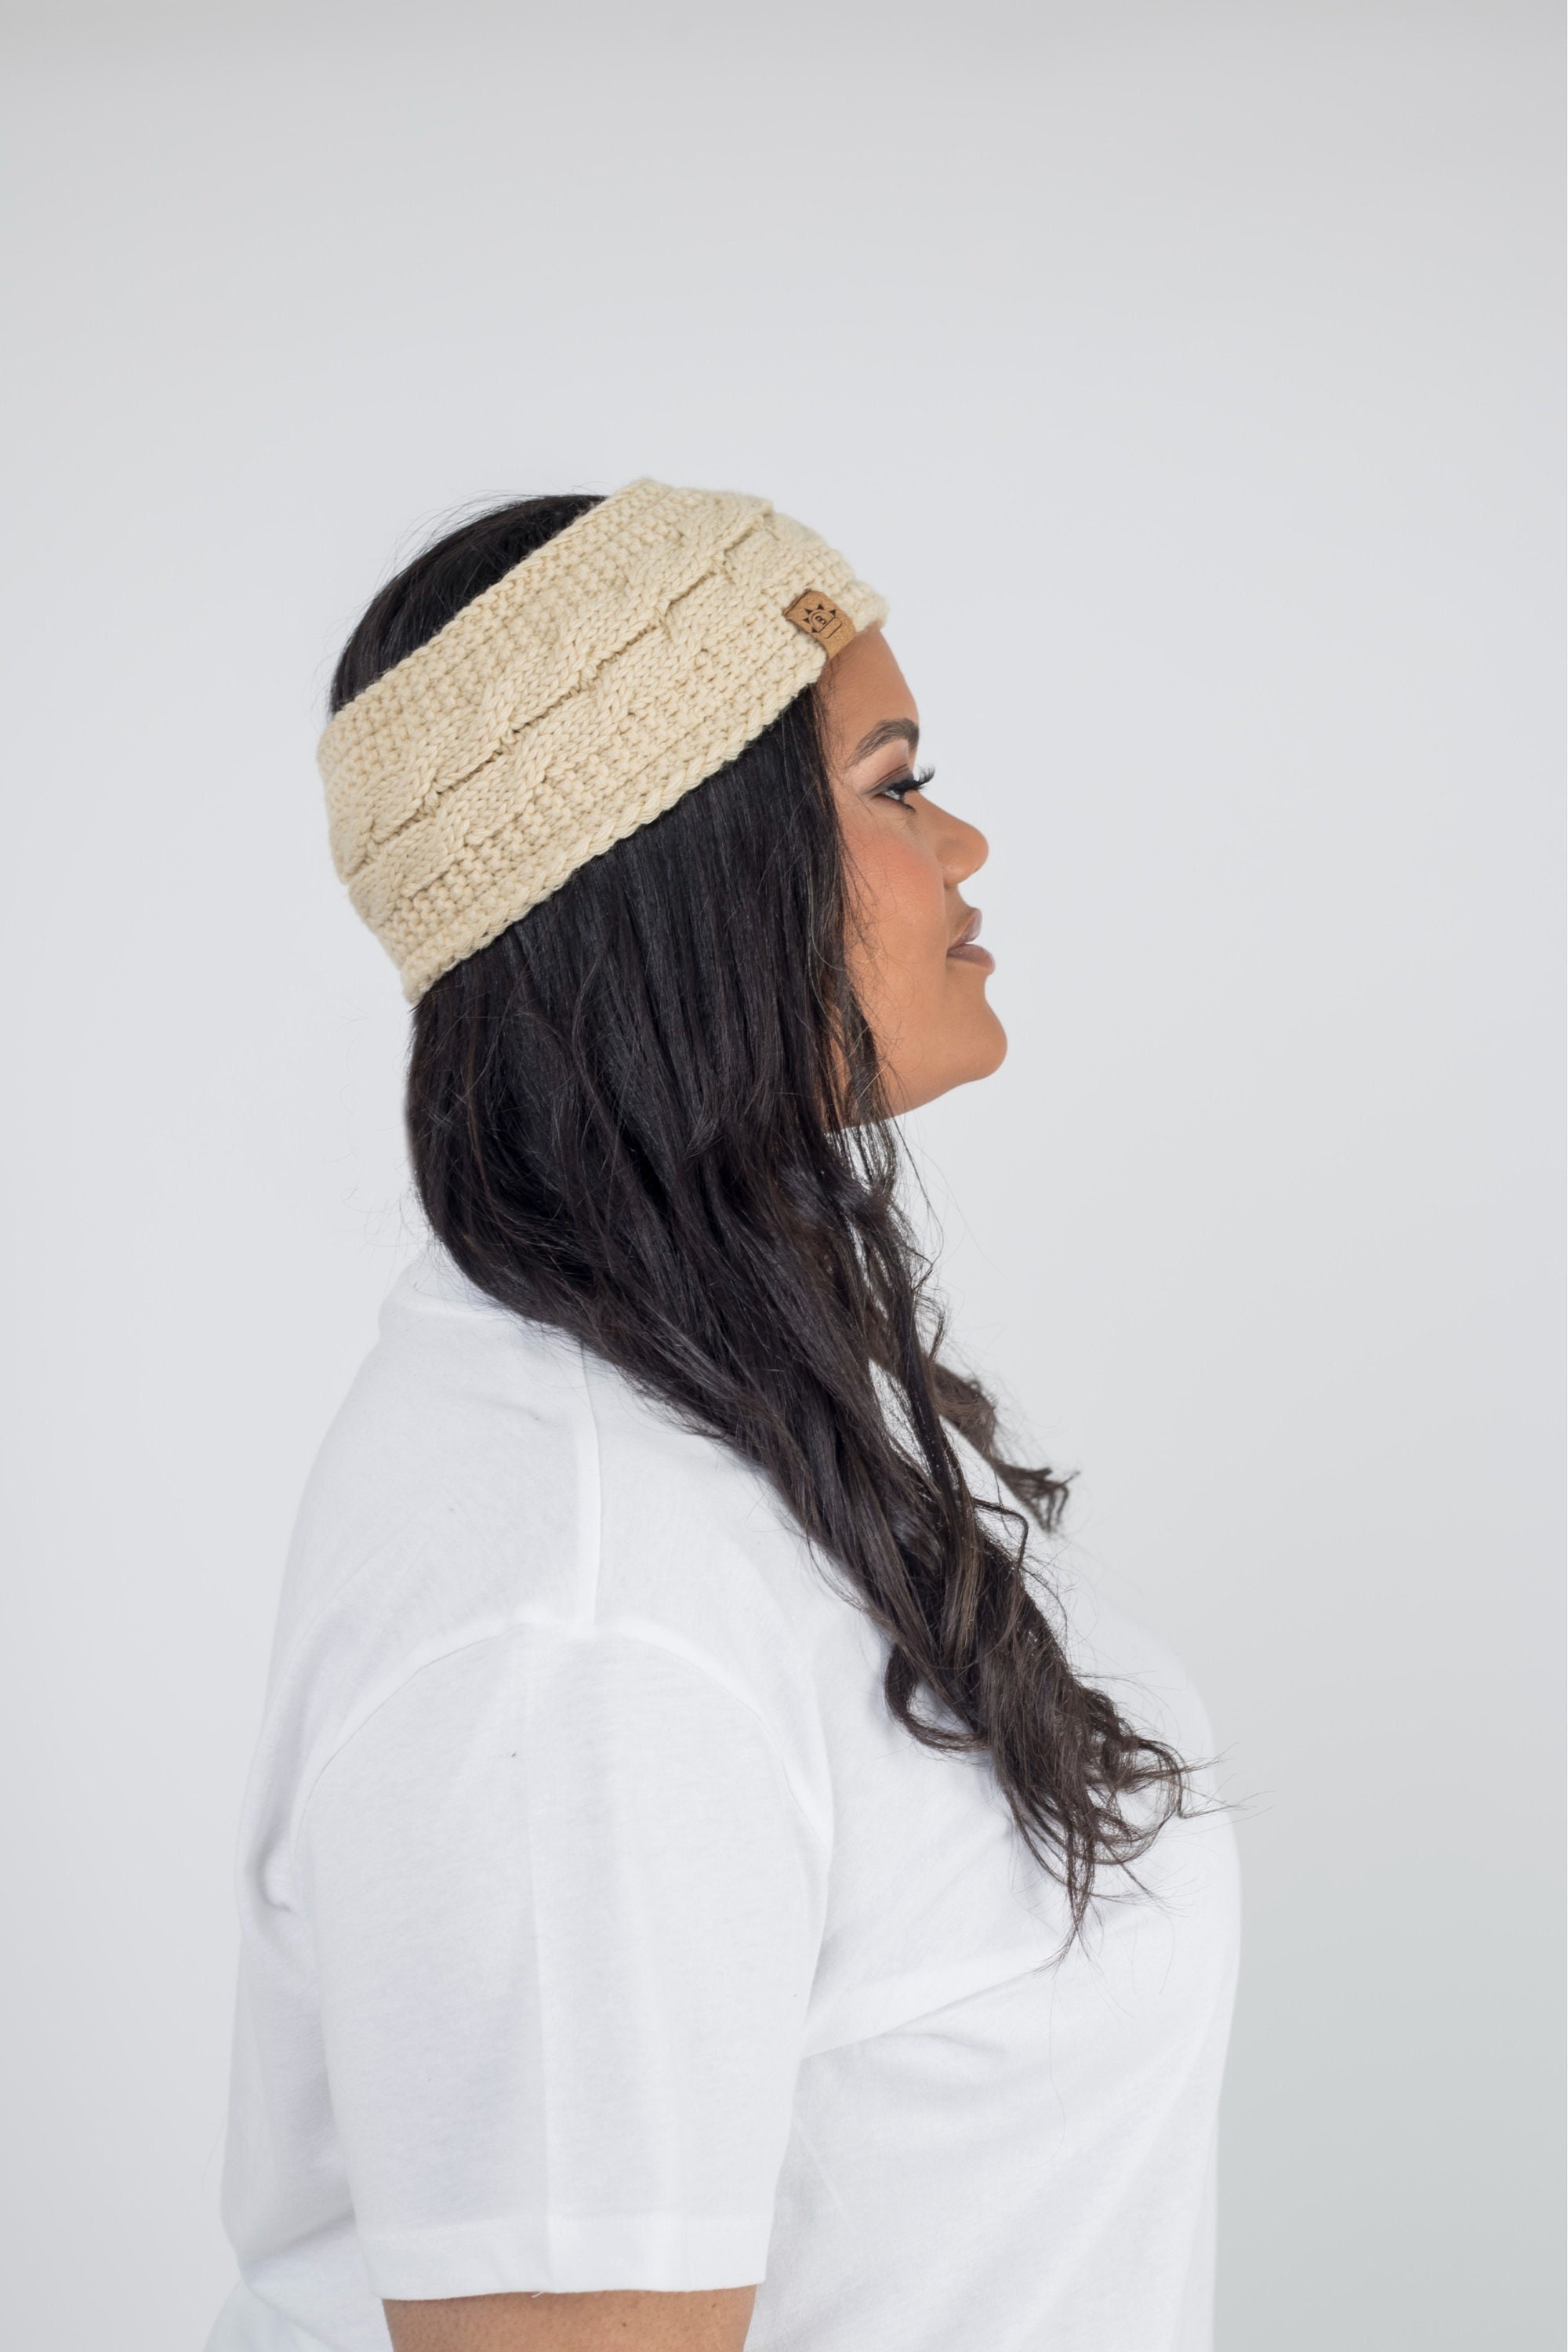 Satin Lined Knitted Headband in Cream